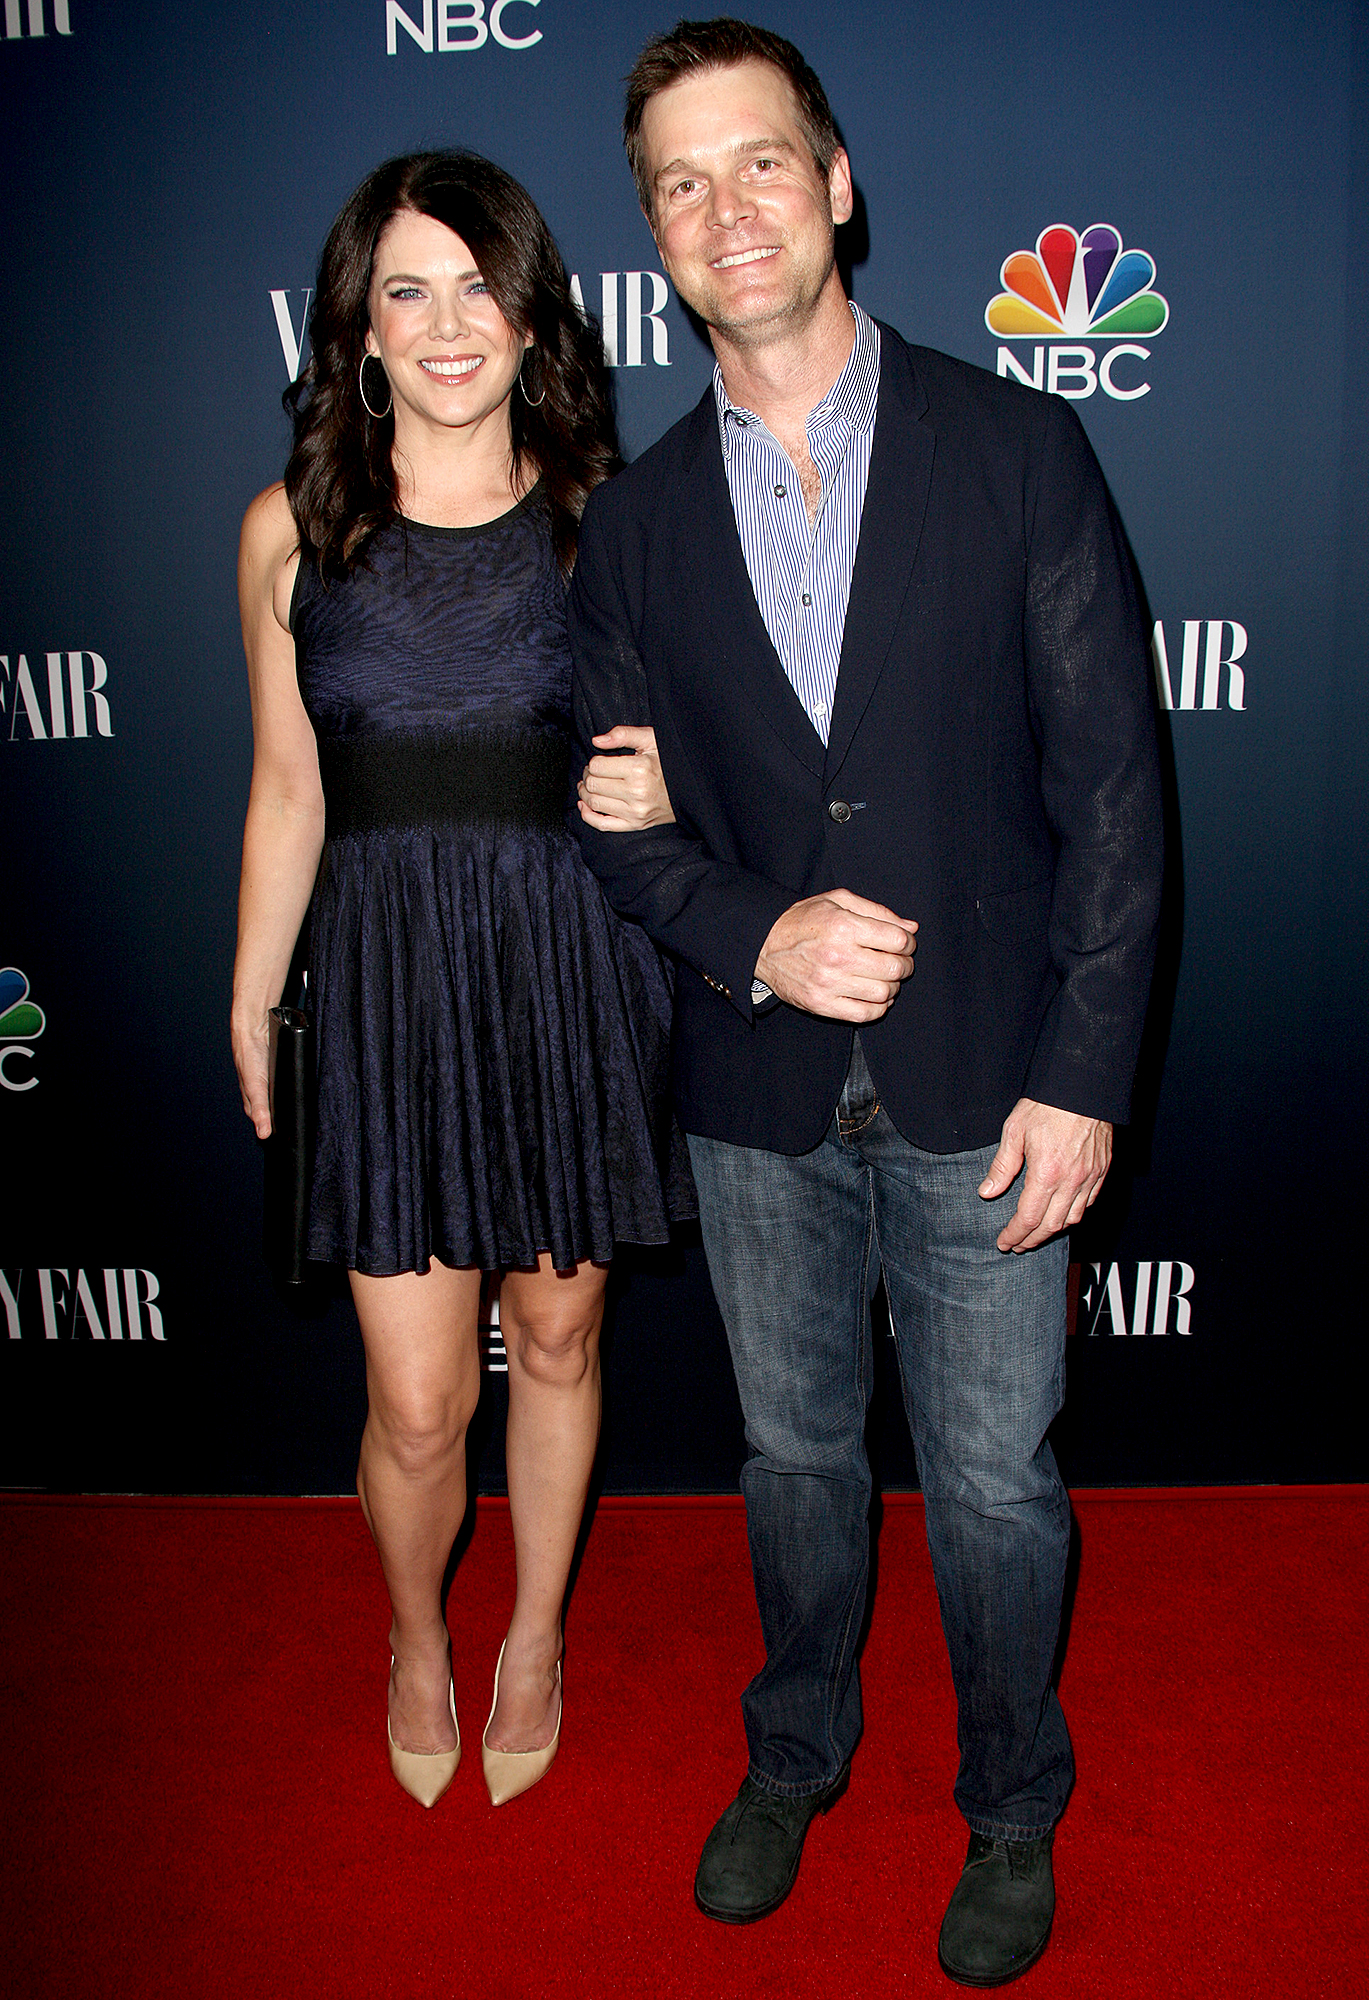 5-Jokes-they're-married-Lauren-Graham-and-Peter-Krause